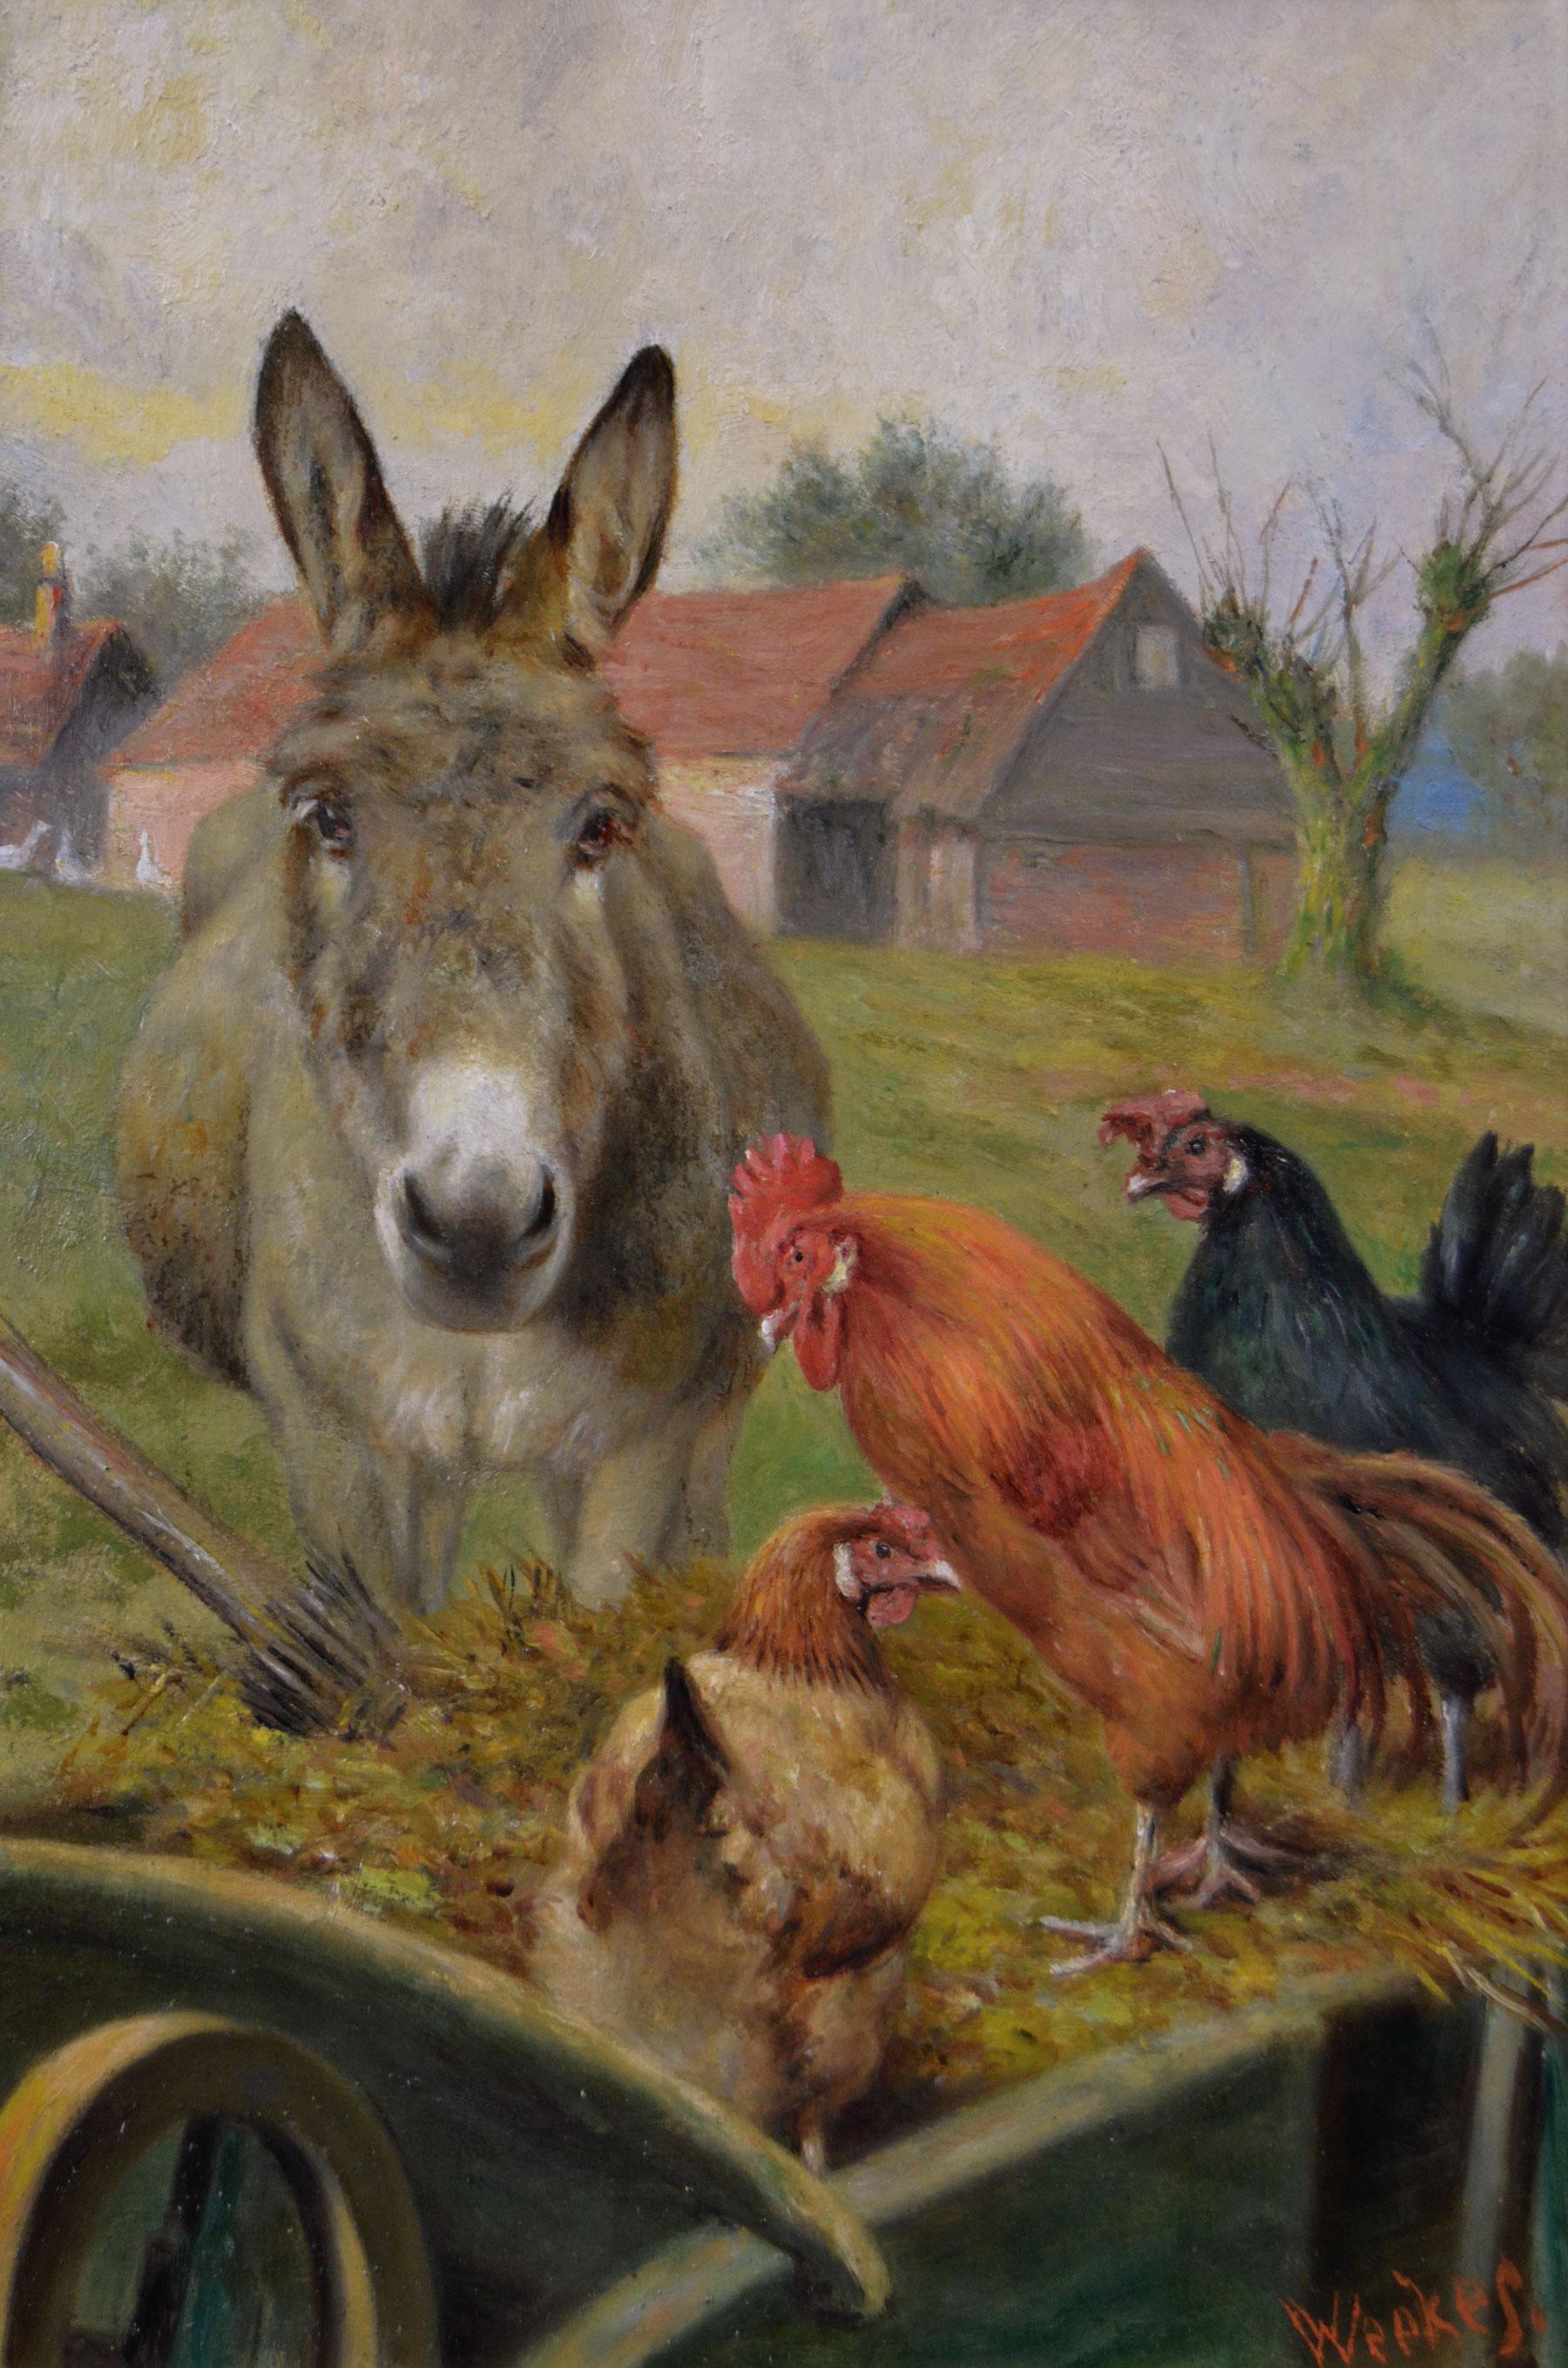 19th Century genre oil painting of a donkey with a cockerel & hens - Painting by Herbert William Weekes